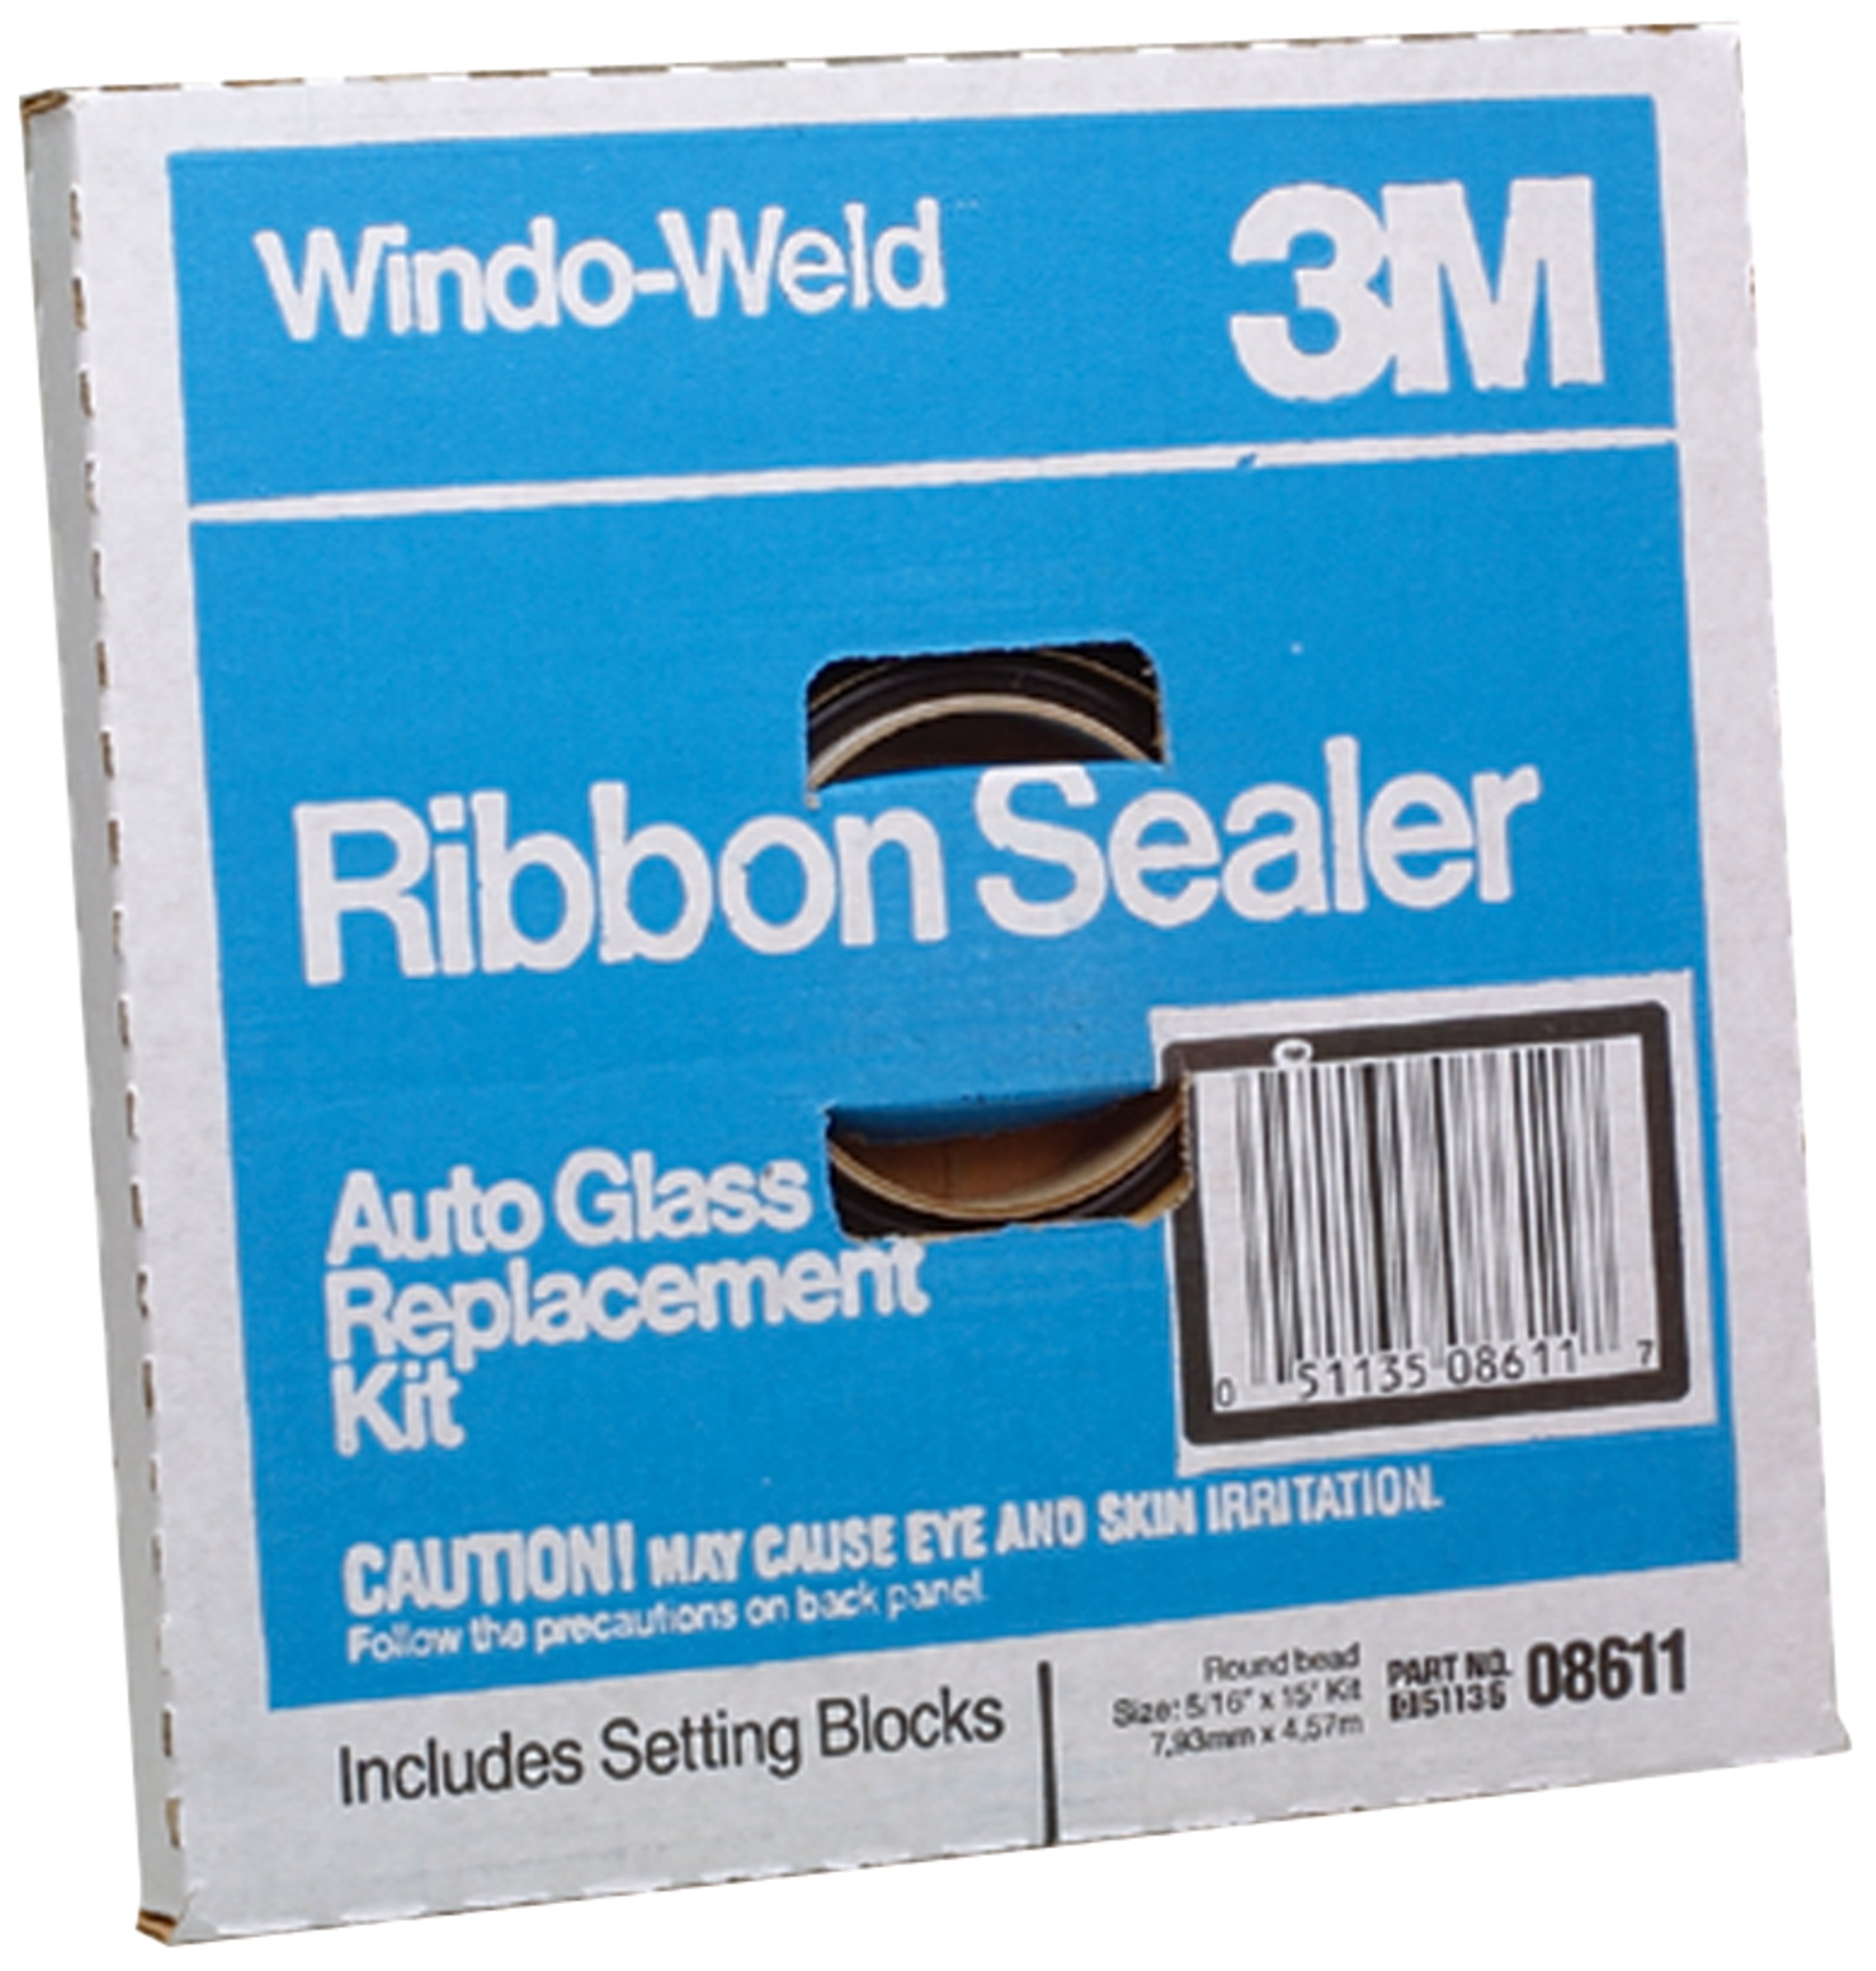  For controlled compressability and easy installation, utilize the features of 3M™ Windo-Weld™ Round Ribbon Sealer, a one-roll sealer that offers sufficient material for a backlite or windshield replacement.